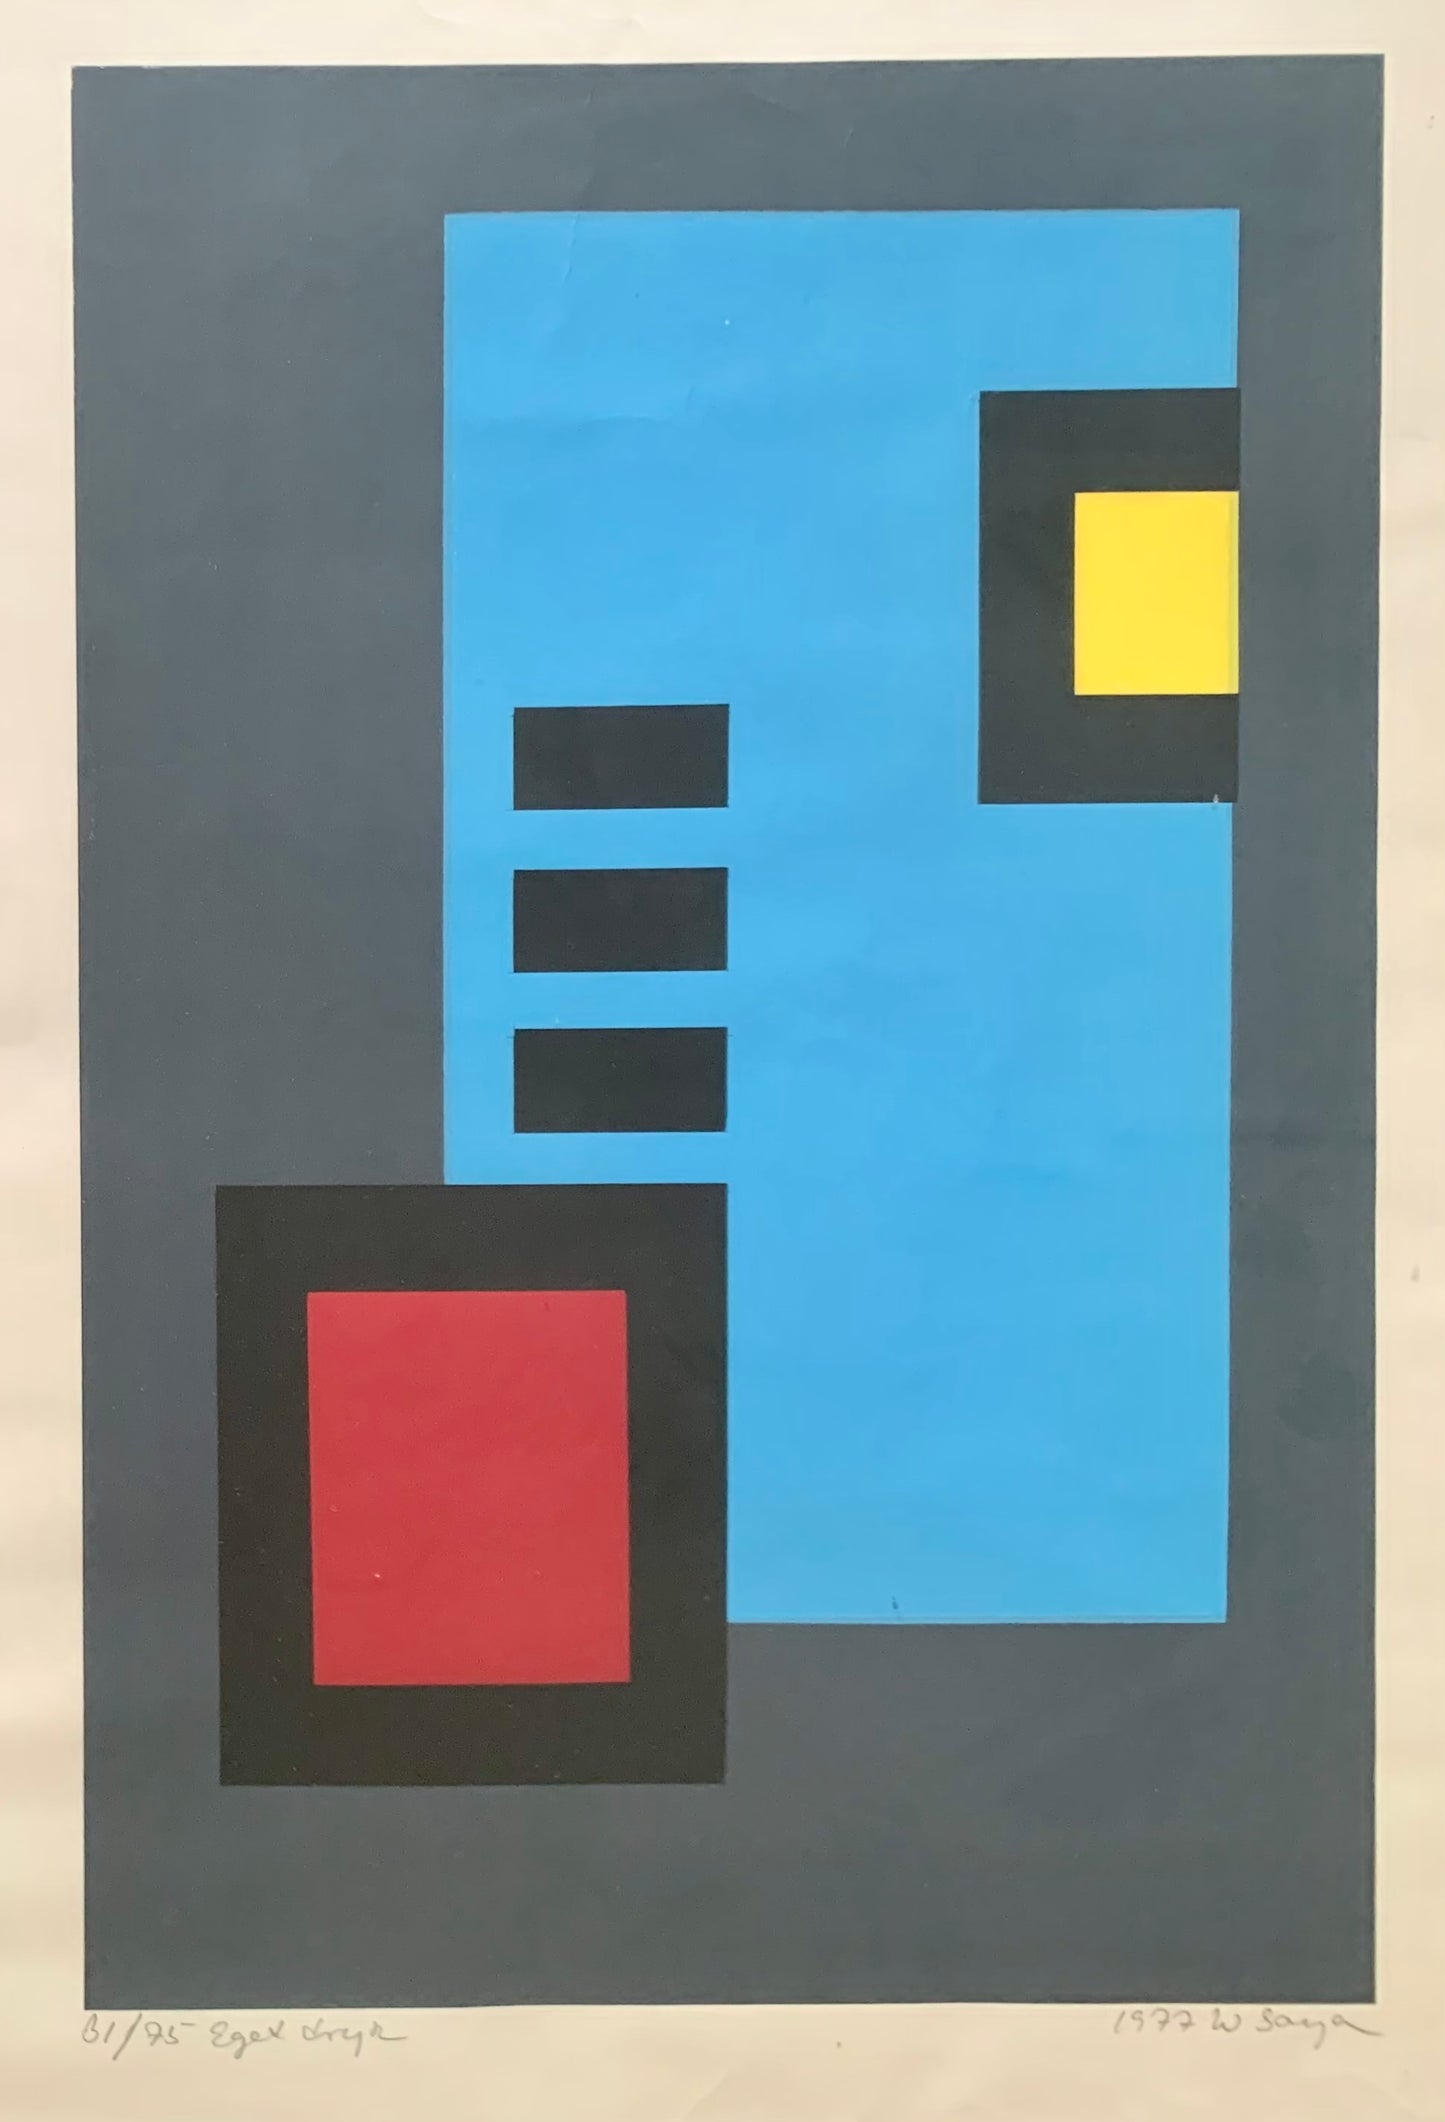 William Soya. Composition, 1977